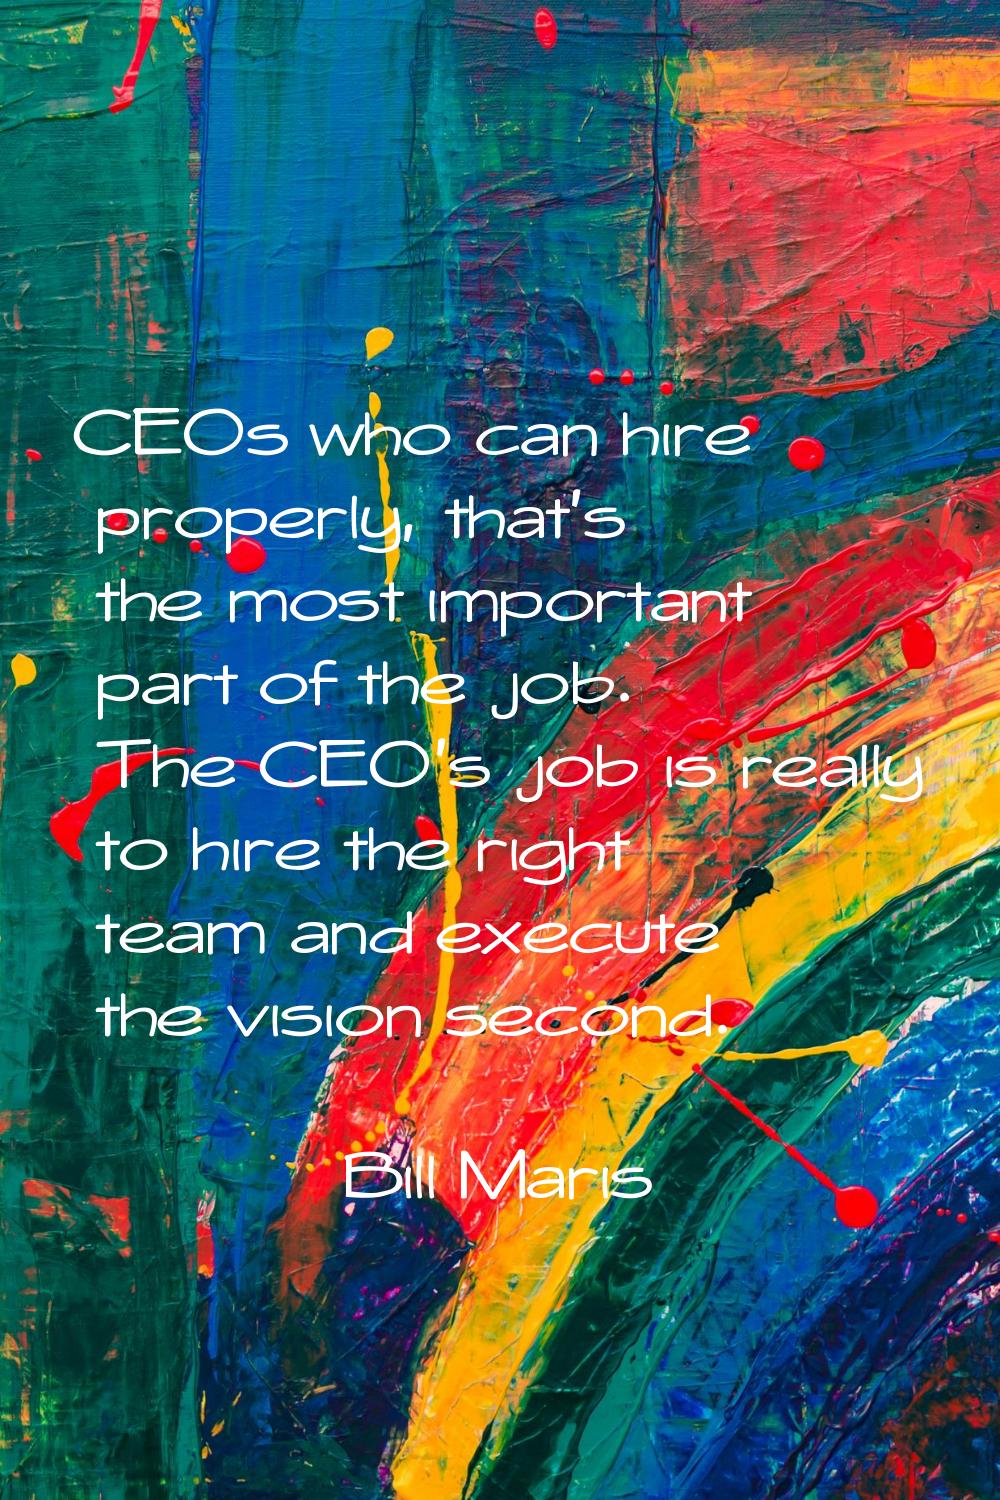 CEOs who can hire properly, that's the most important part of the job. The CEO's job is really to h